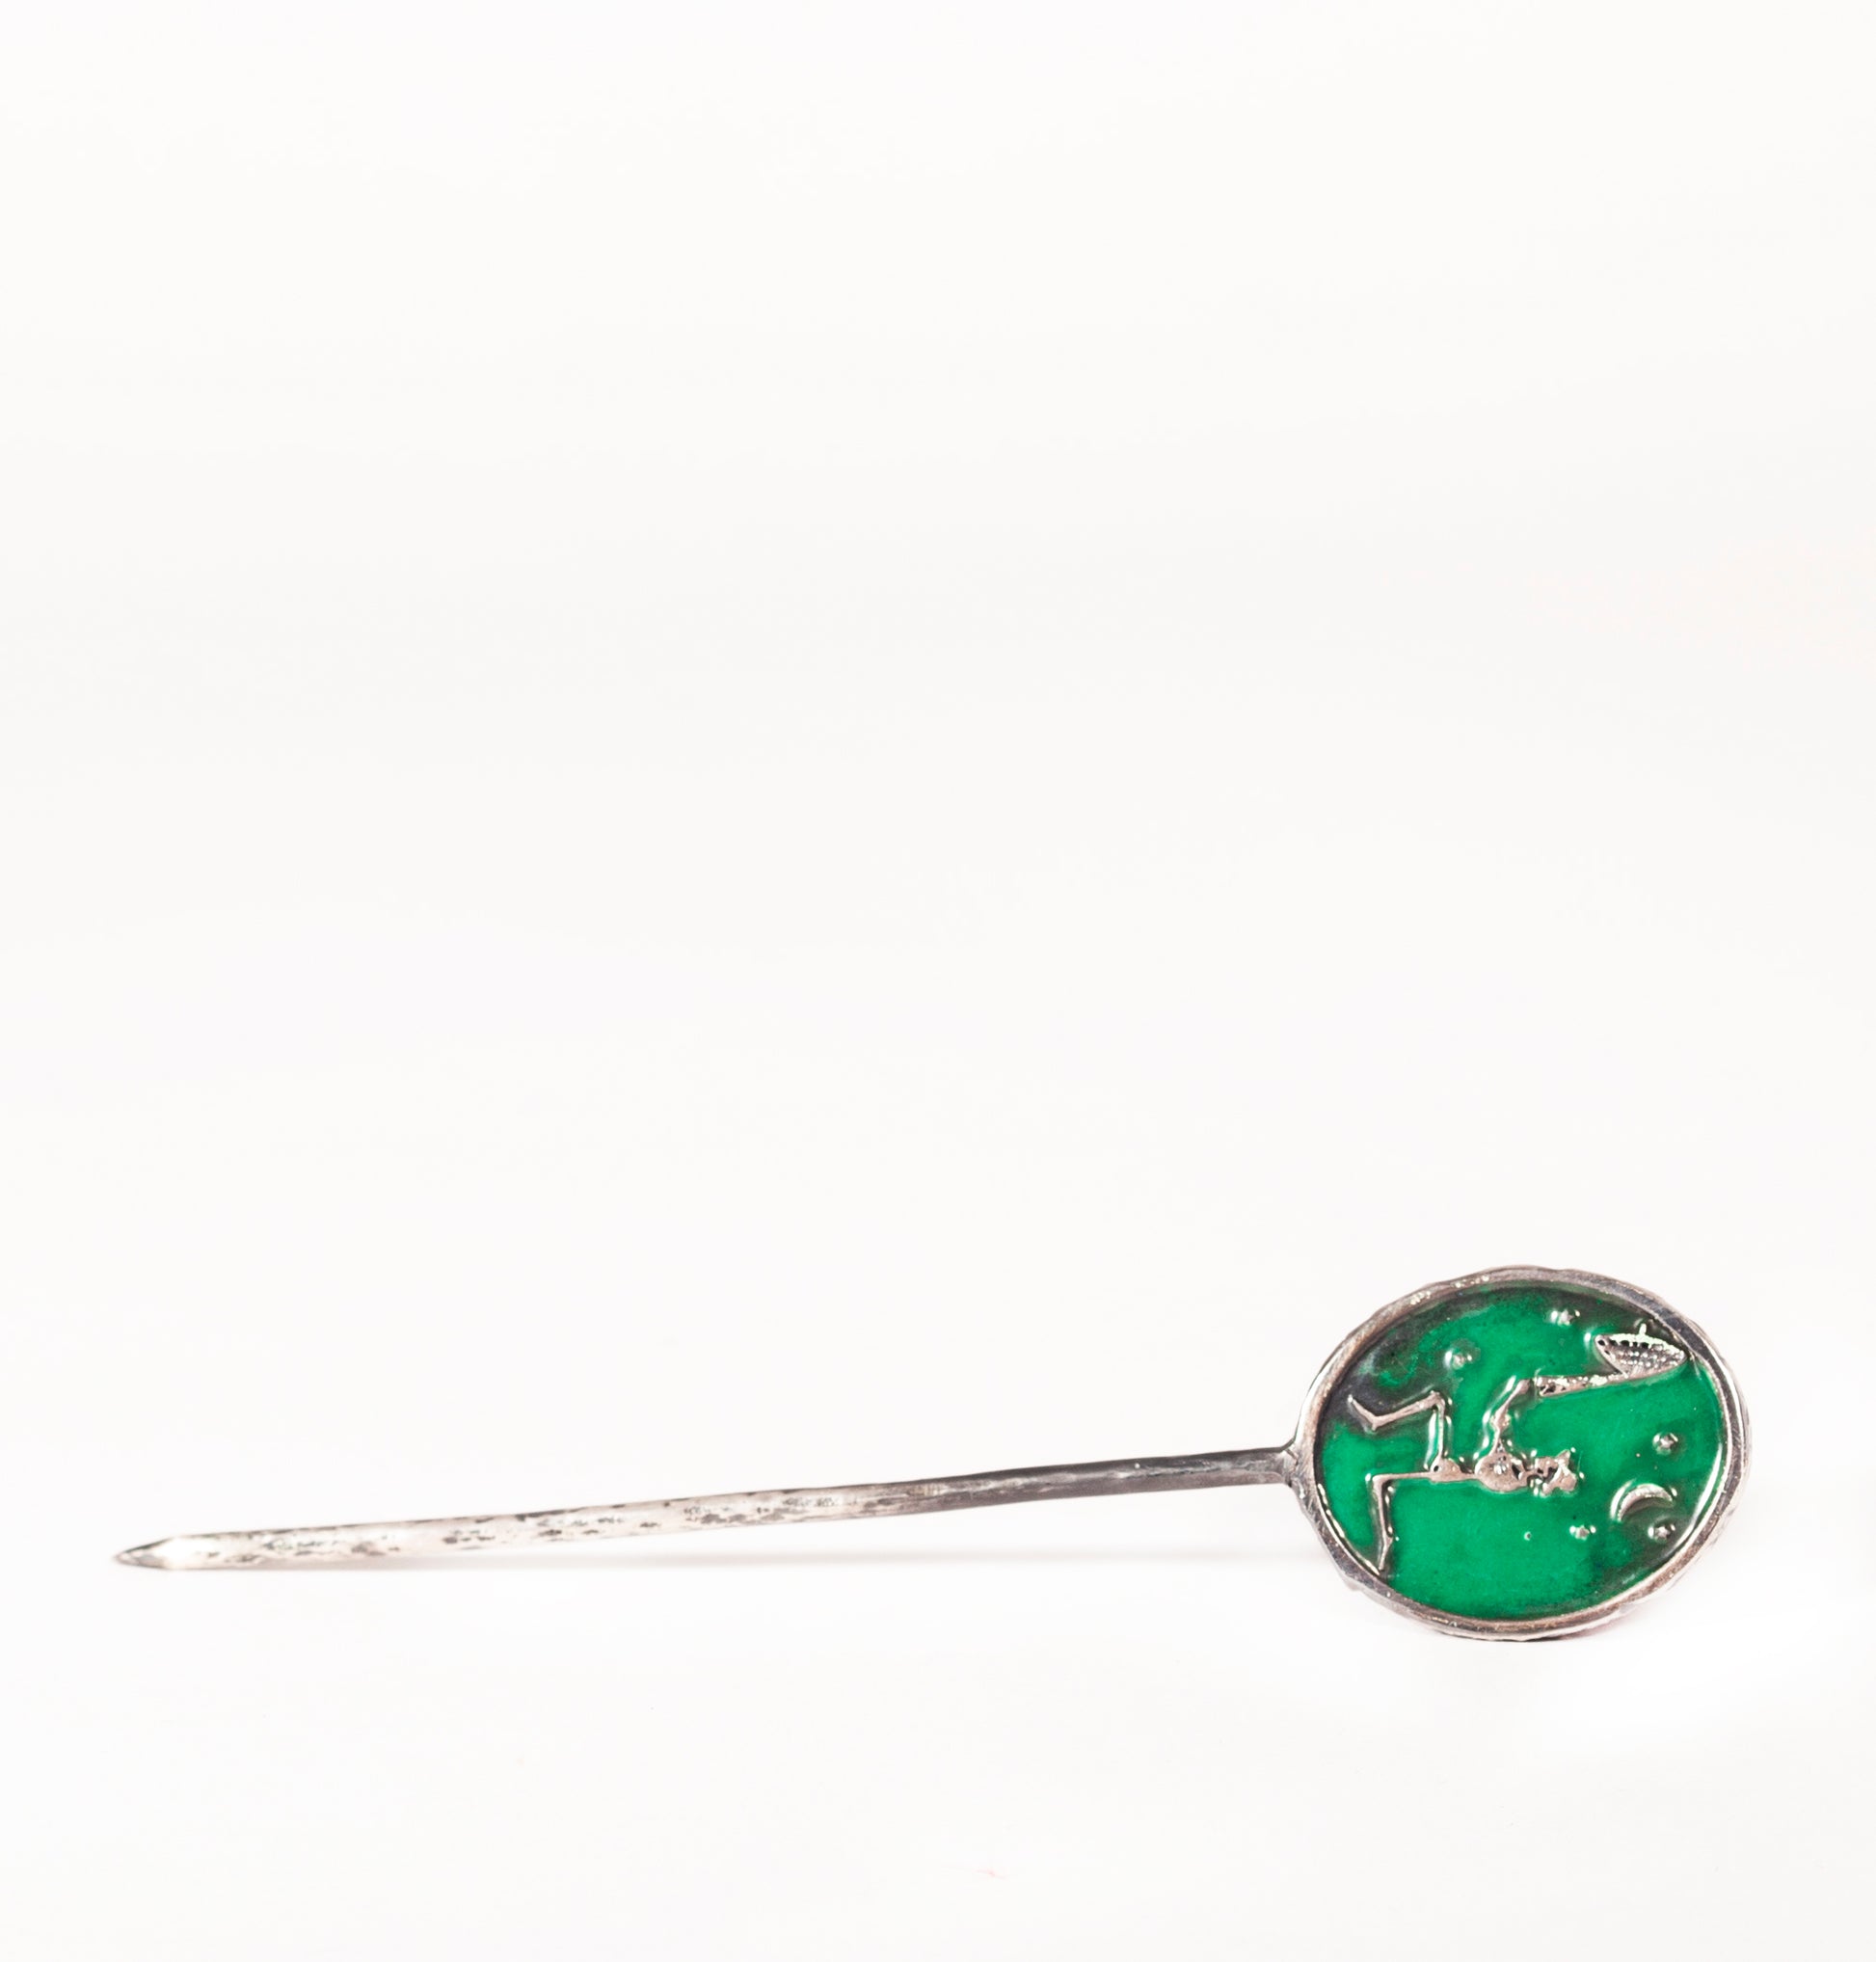 Silver, patina & green enamel hand crafted hat pin.